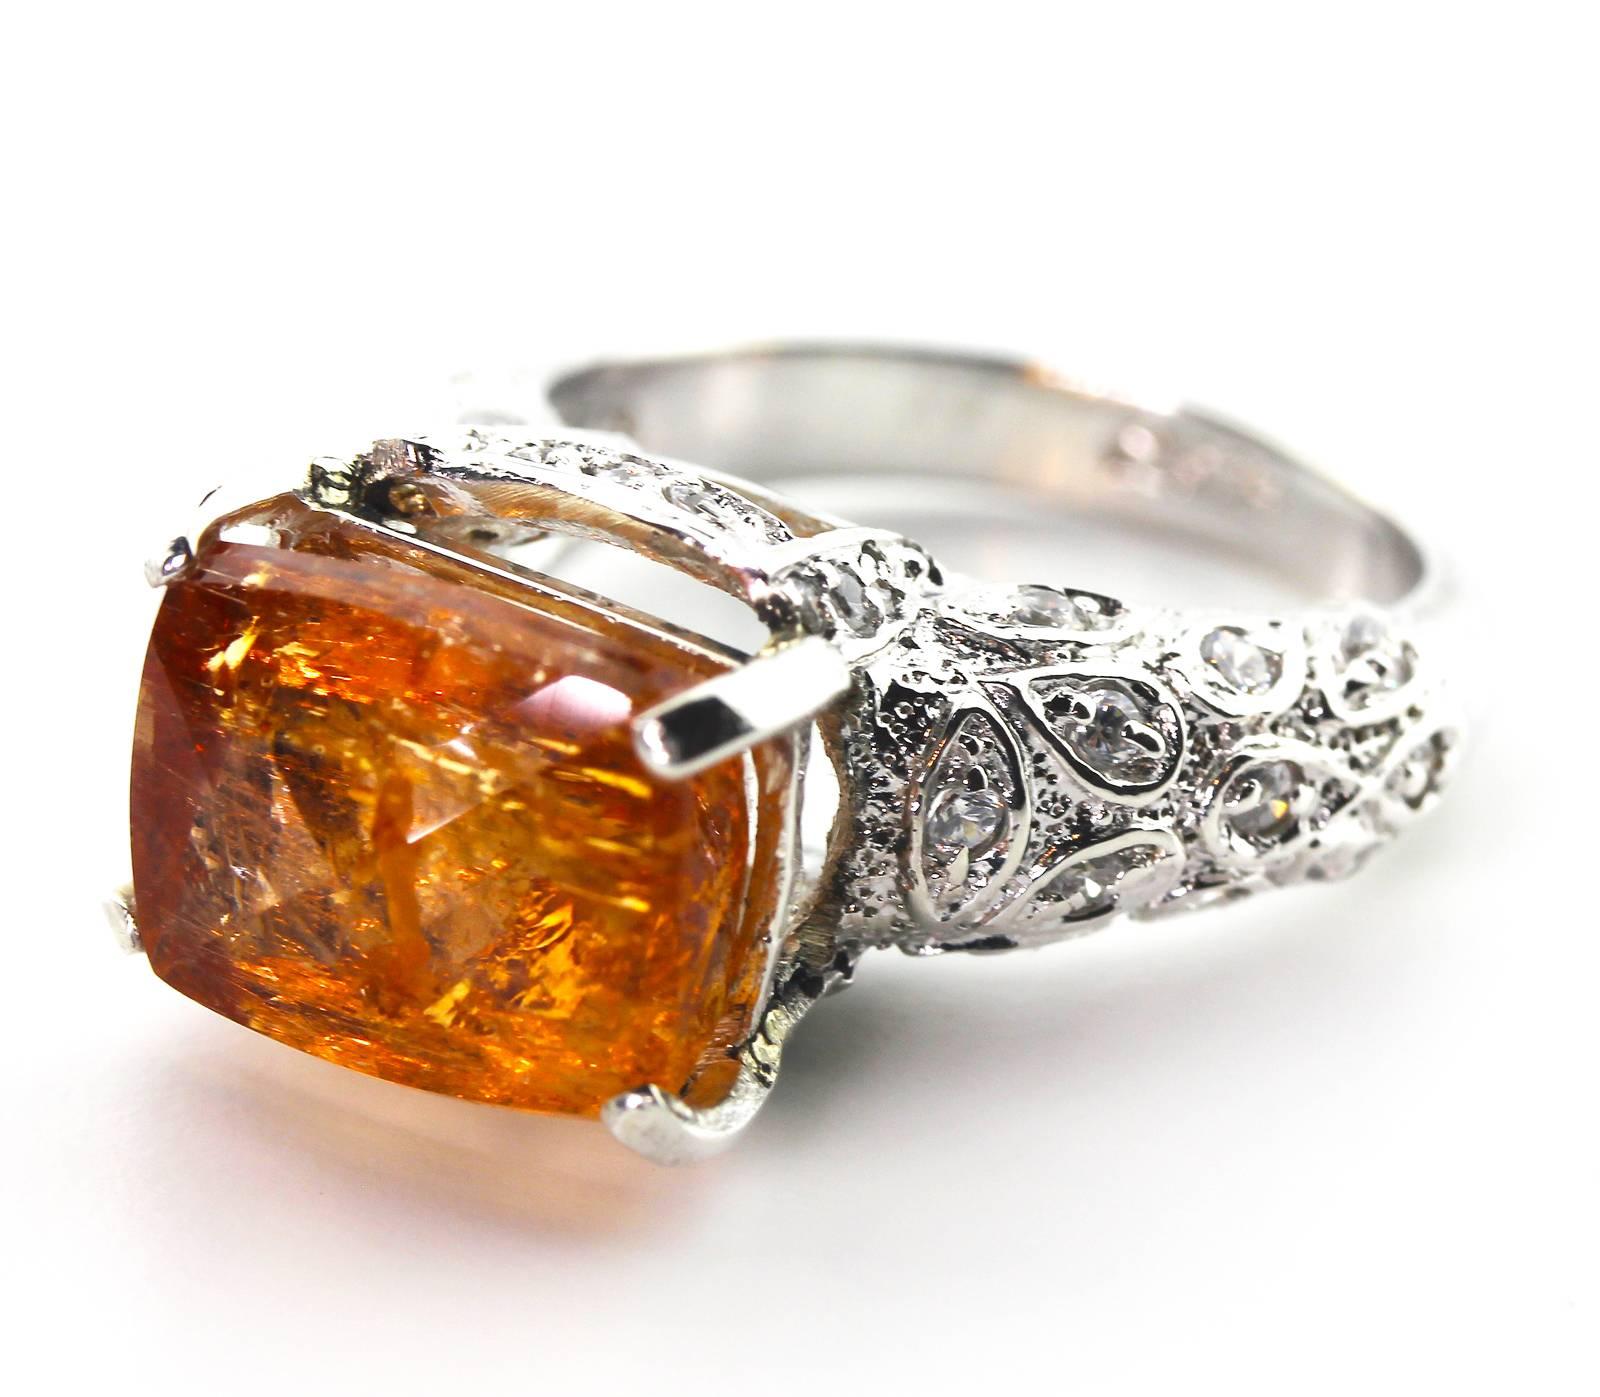 Mixed Cut AJD Spectacular RARE 9.47 Ct Imperial Topaz Antique Setting Silver Ring